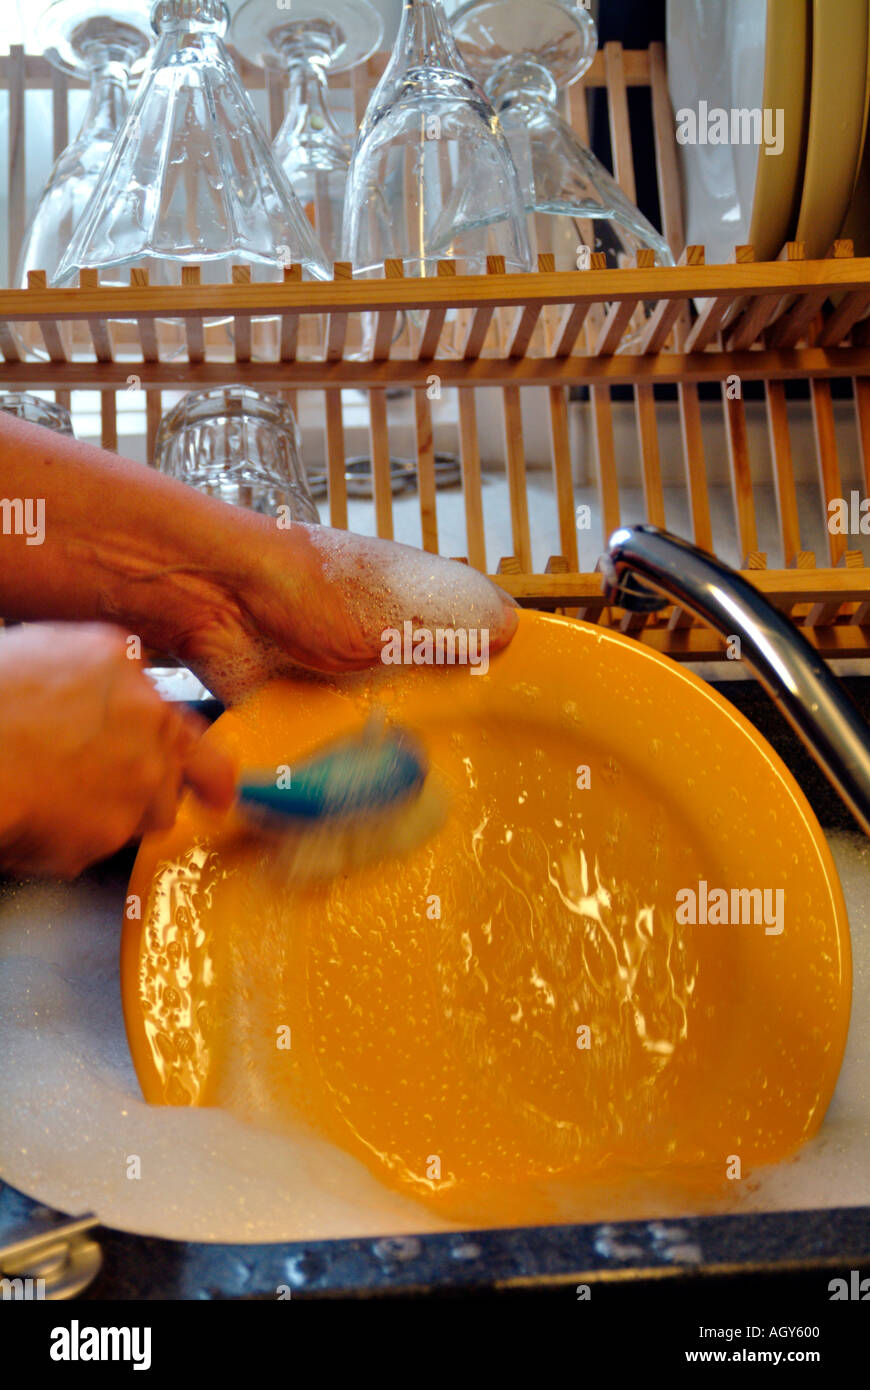 kitchen work doing the dishes Stock Photo